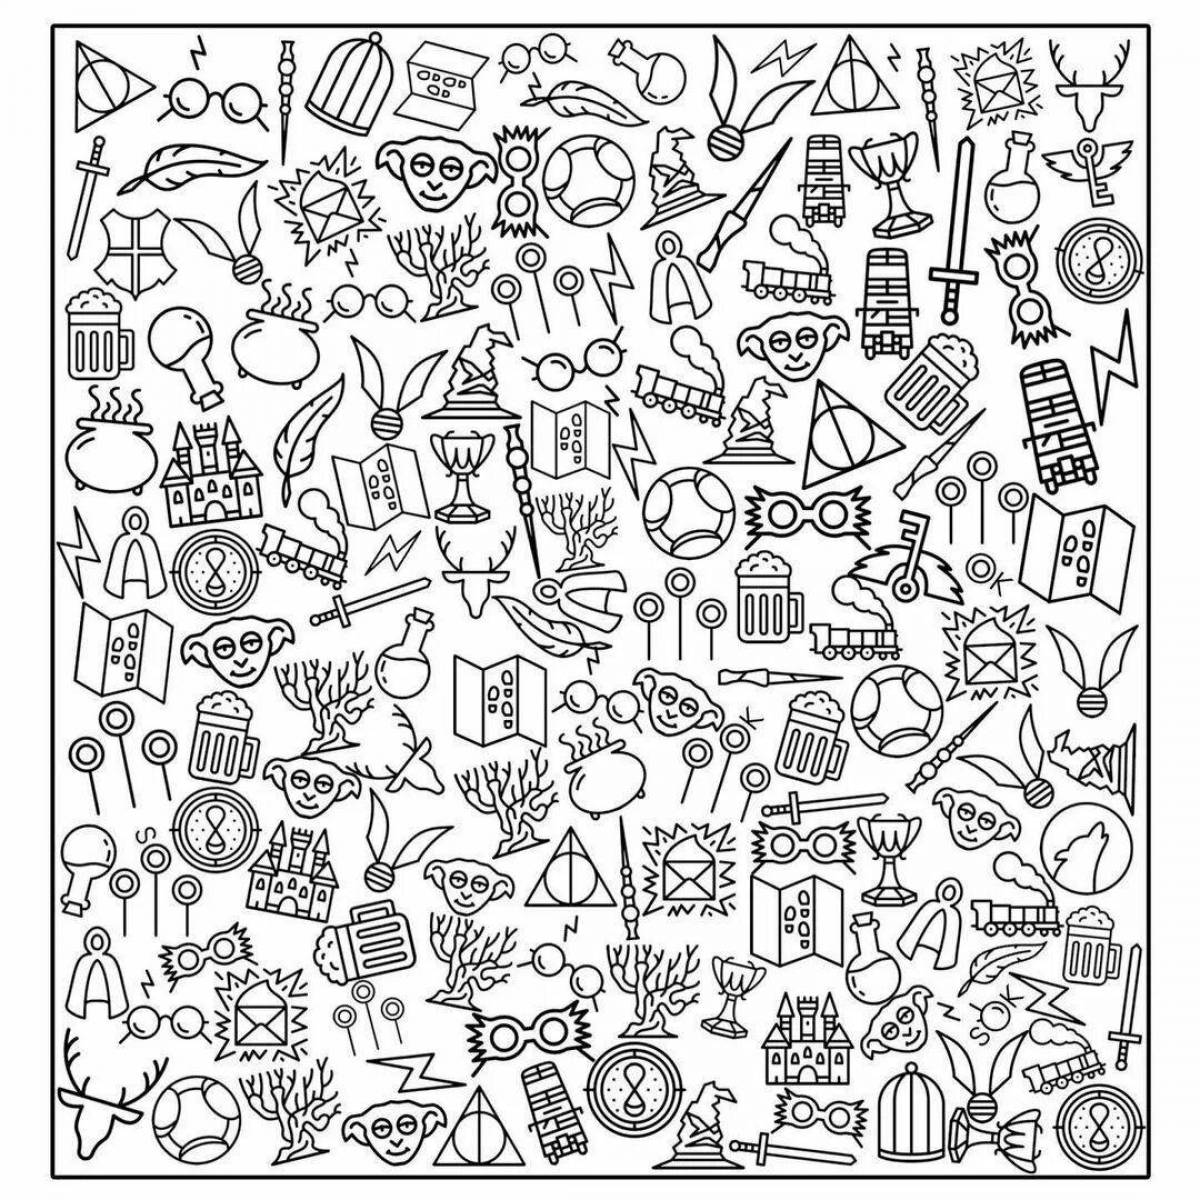 Amazing coloring page for very smart object search